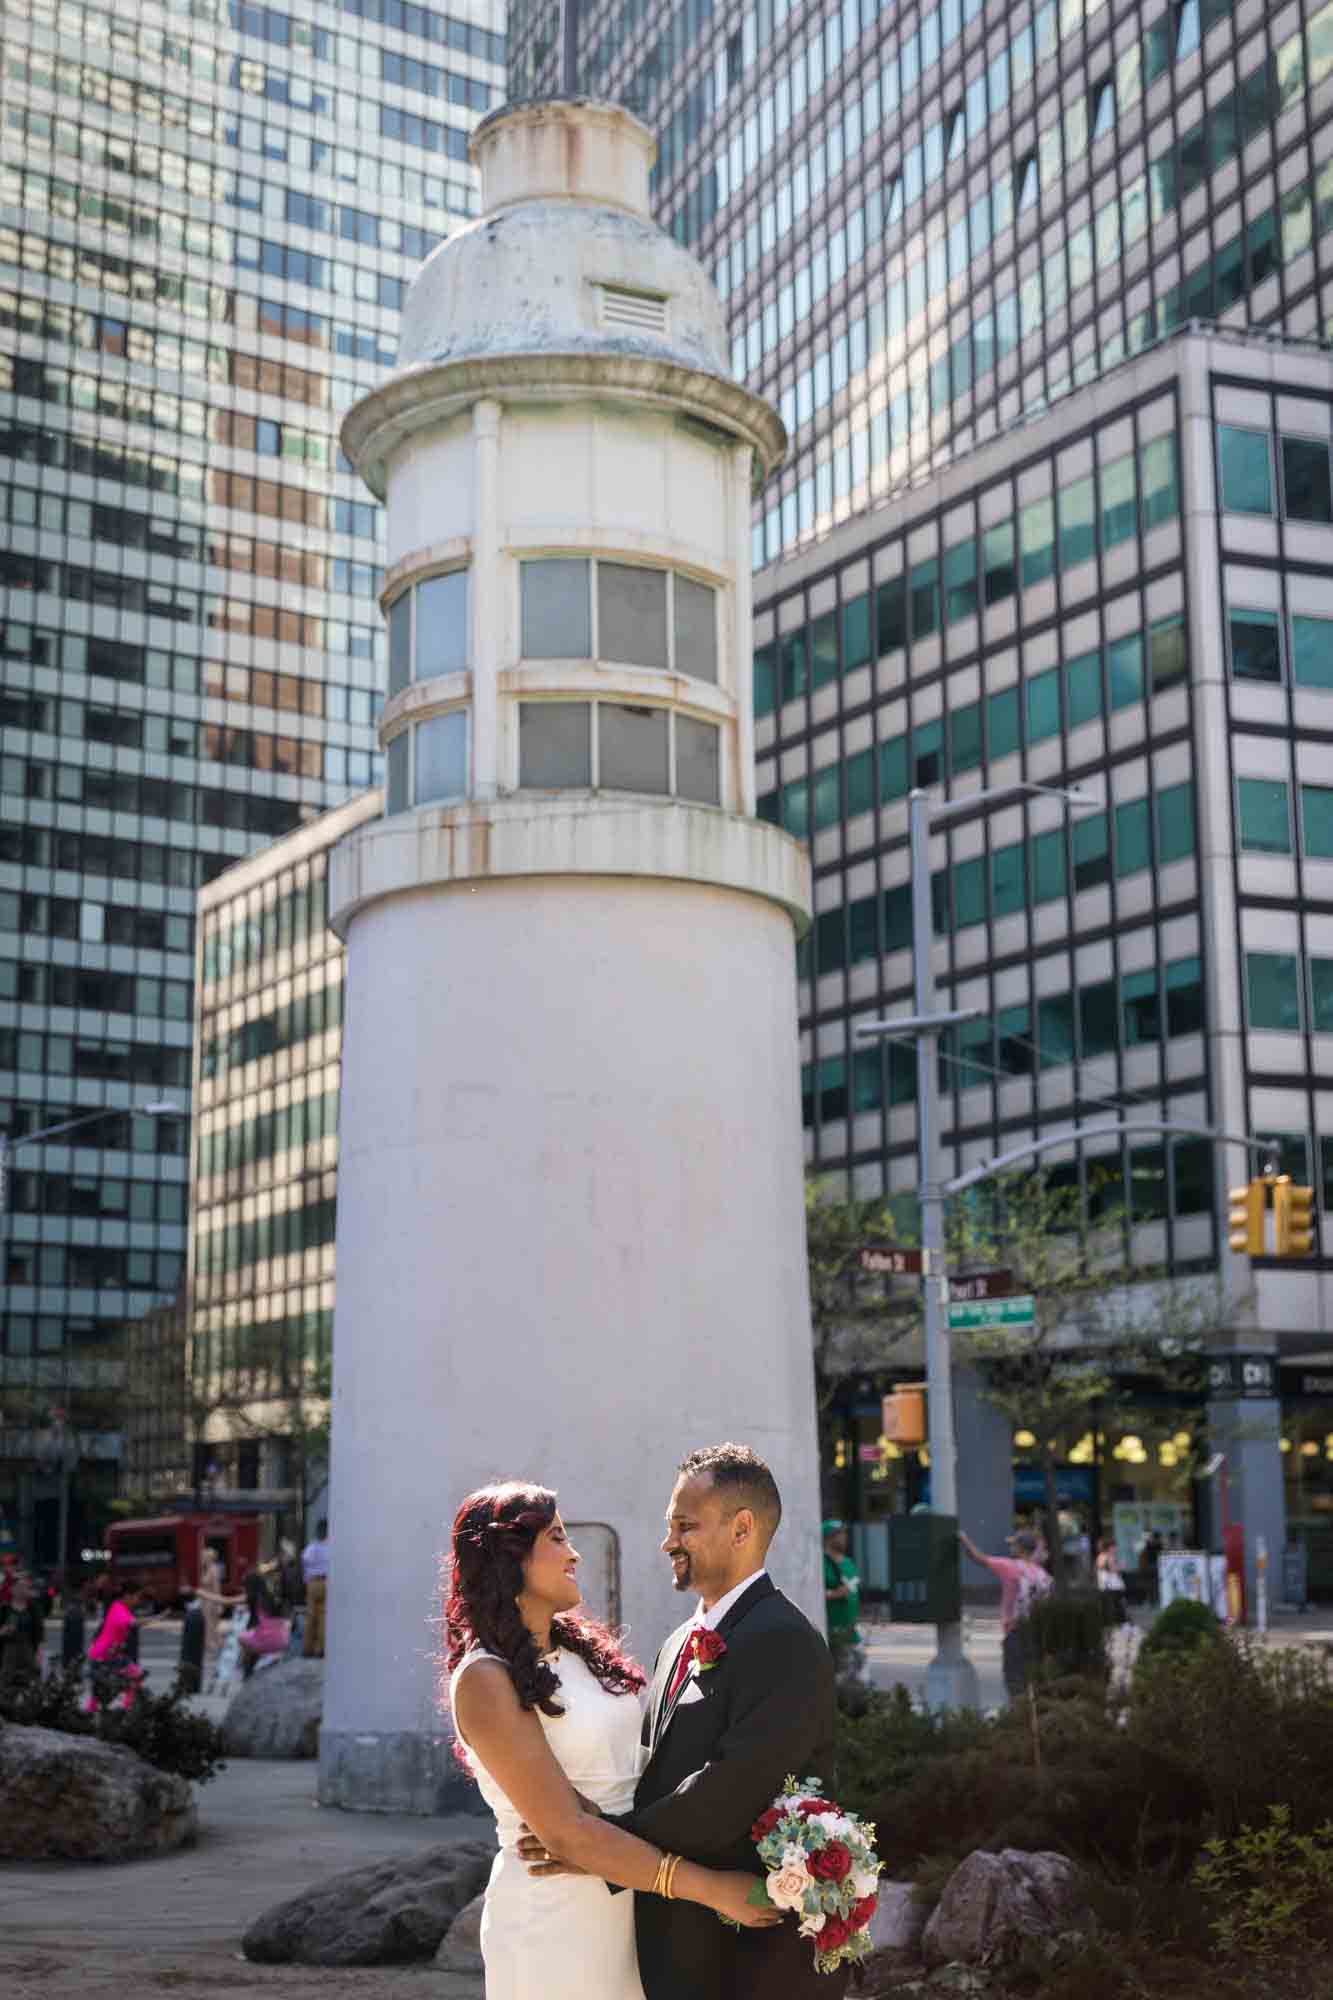 Bride and groom standing in front of lighthouse in South Street Seaport